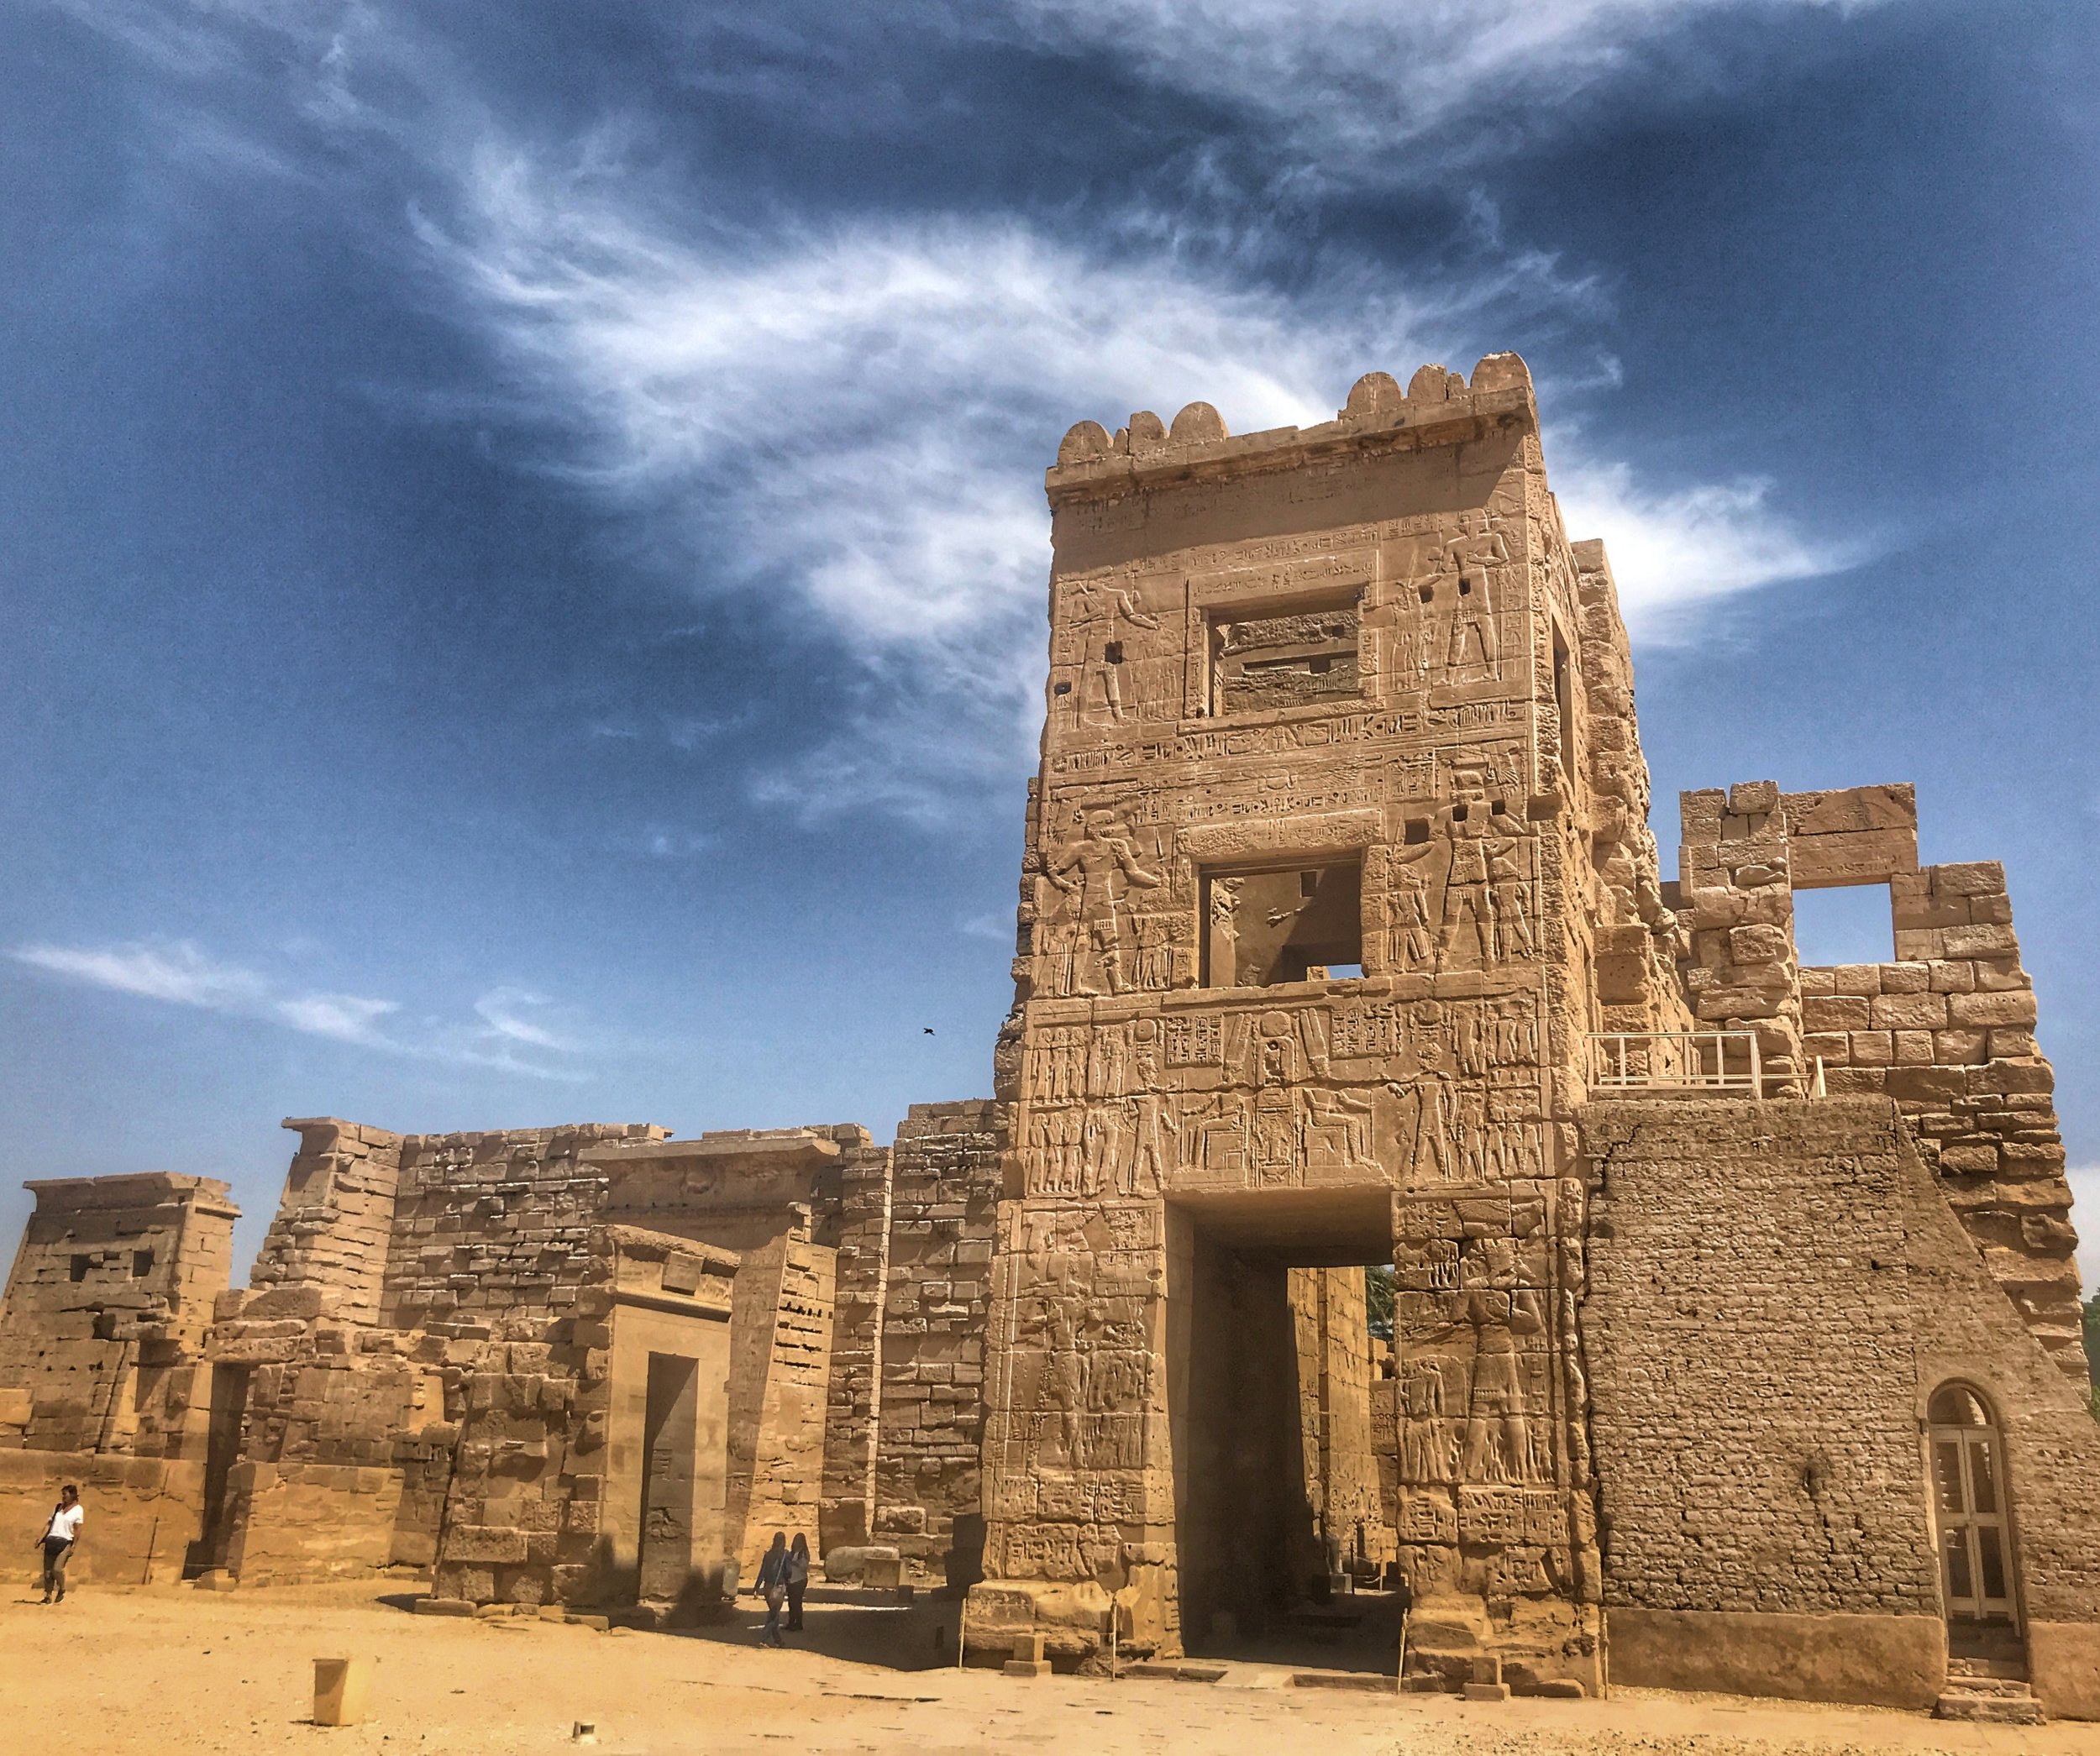 When in Luxor, be sure to visit Medinet Habu, an often-overlooked temple